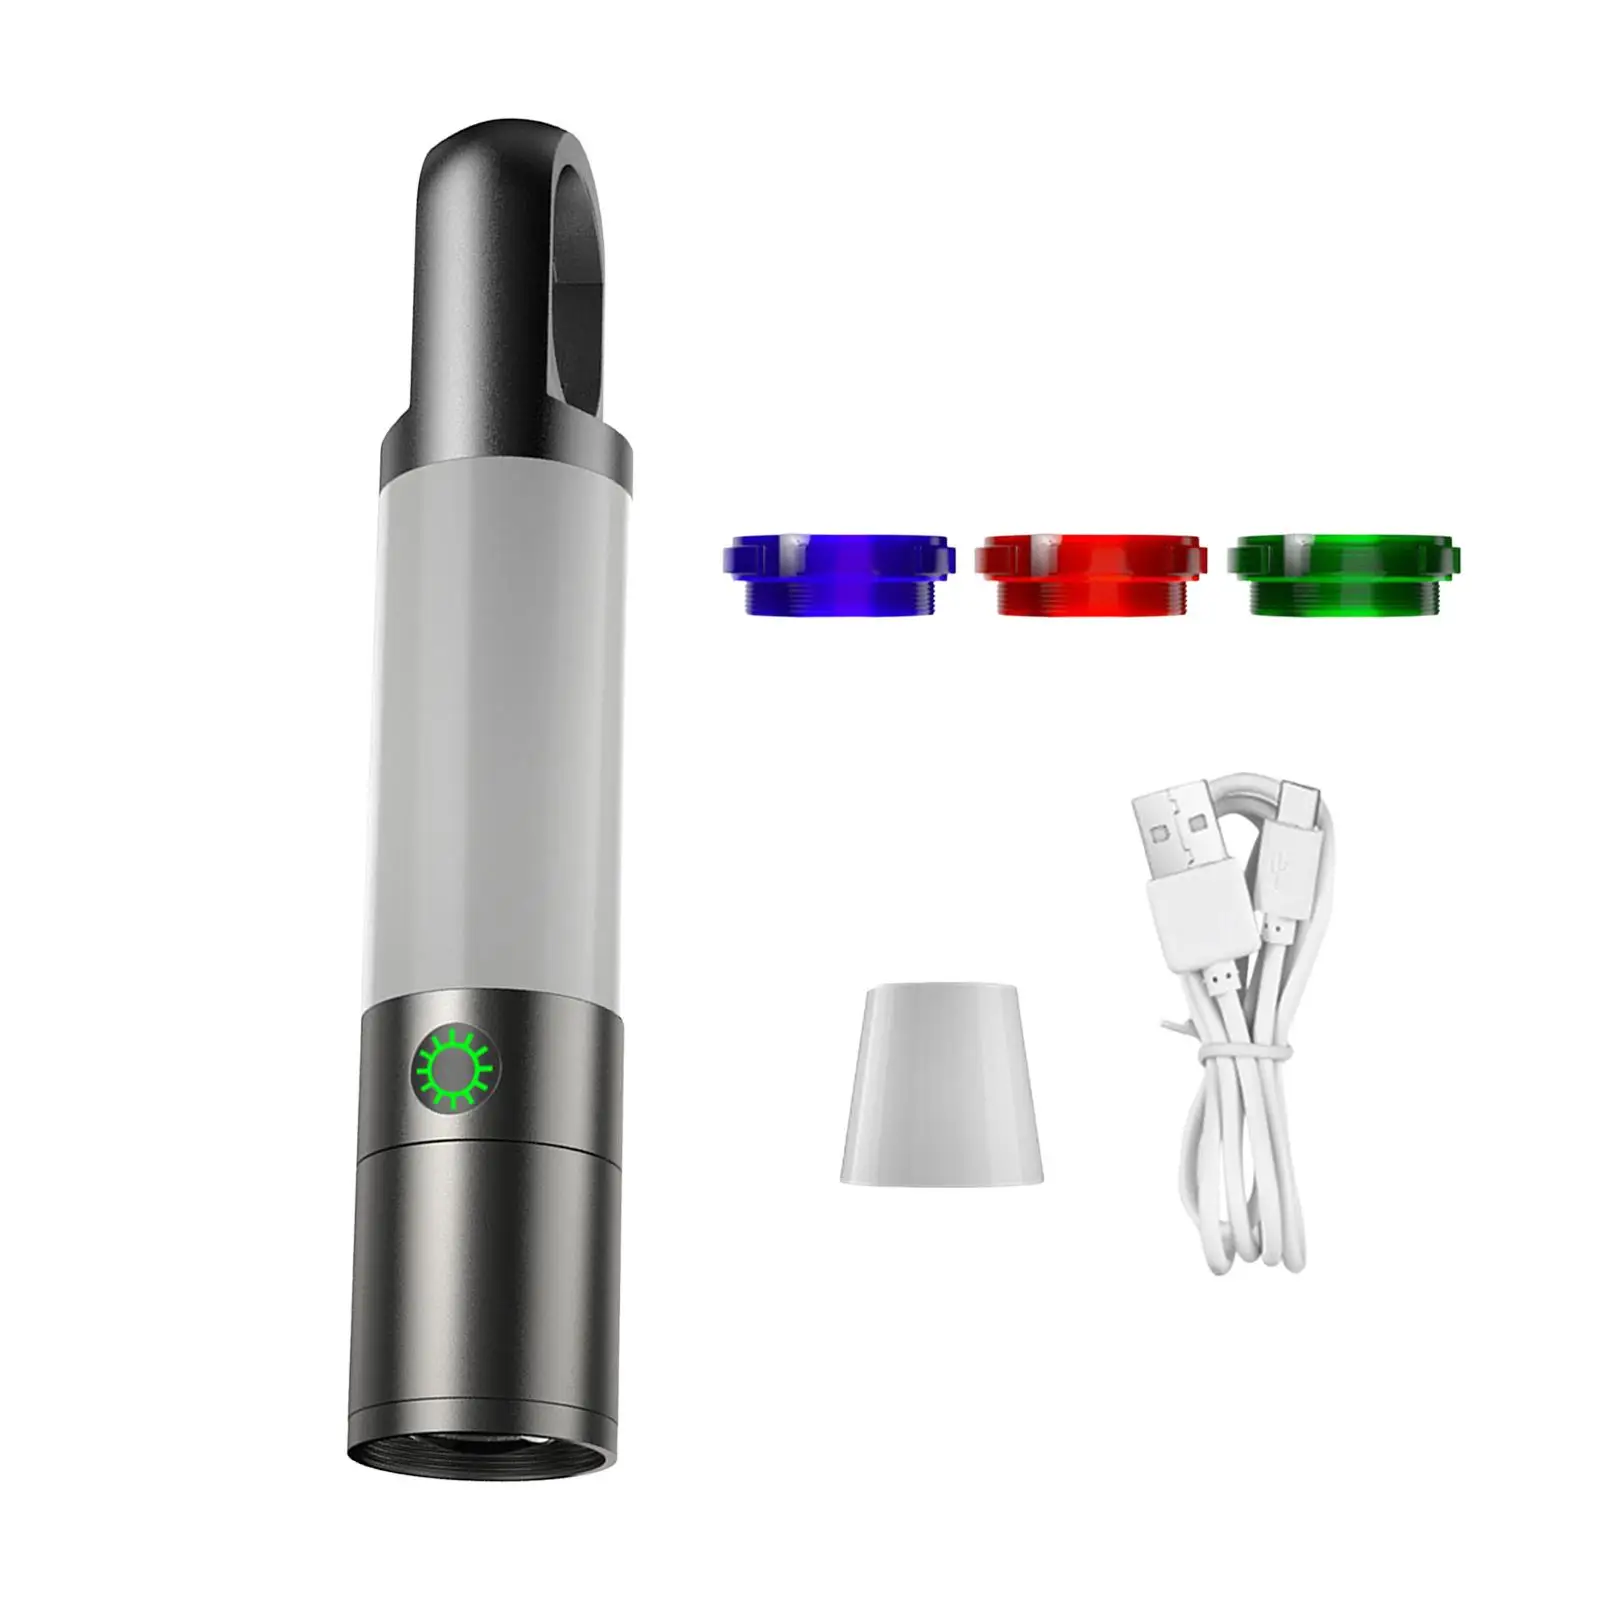 Zoomable Flashlight 8 Lights Modes Camp Lamp for Fishing Climbing